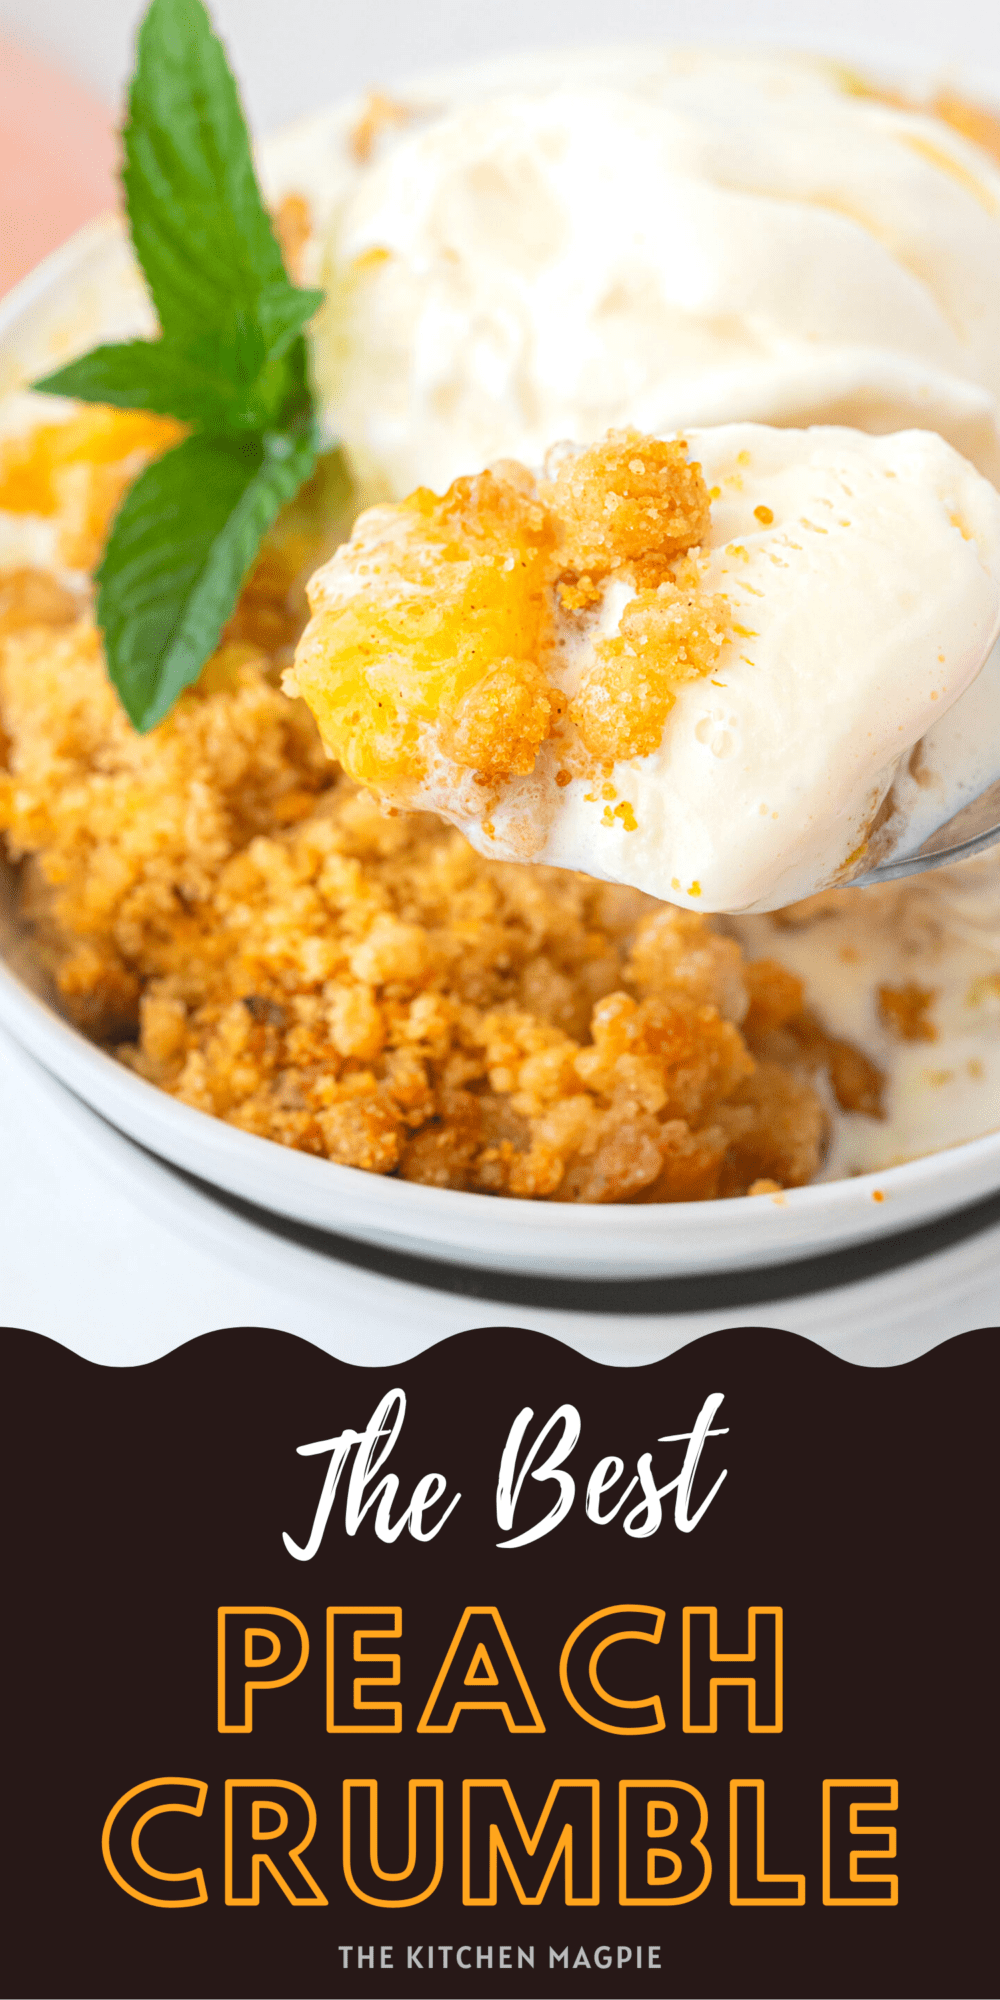 Peach crumble is peaches baked in a sweet sugar sauce, topped with a decadent buttery cookie-like topping. Close to a crisp, but there is no oatmeal, making the topping soft and buttery!
